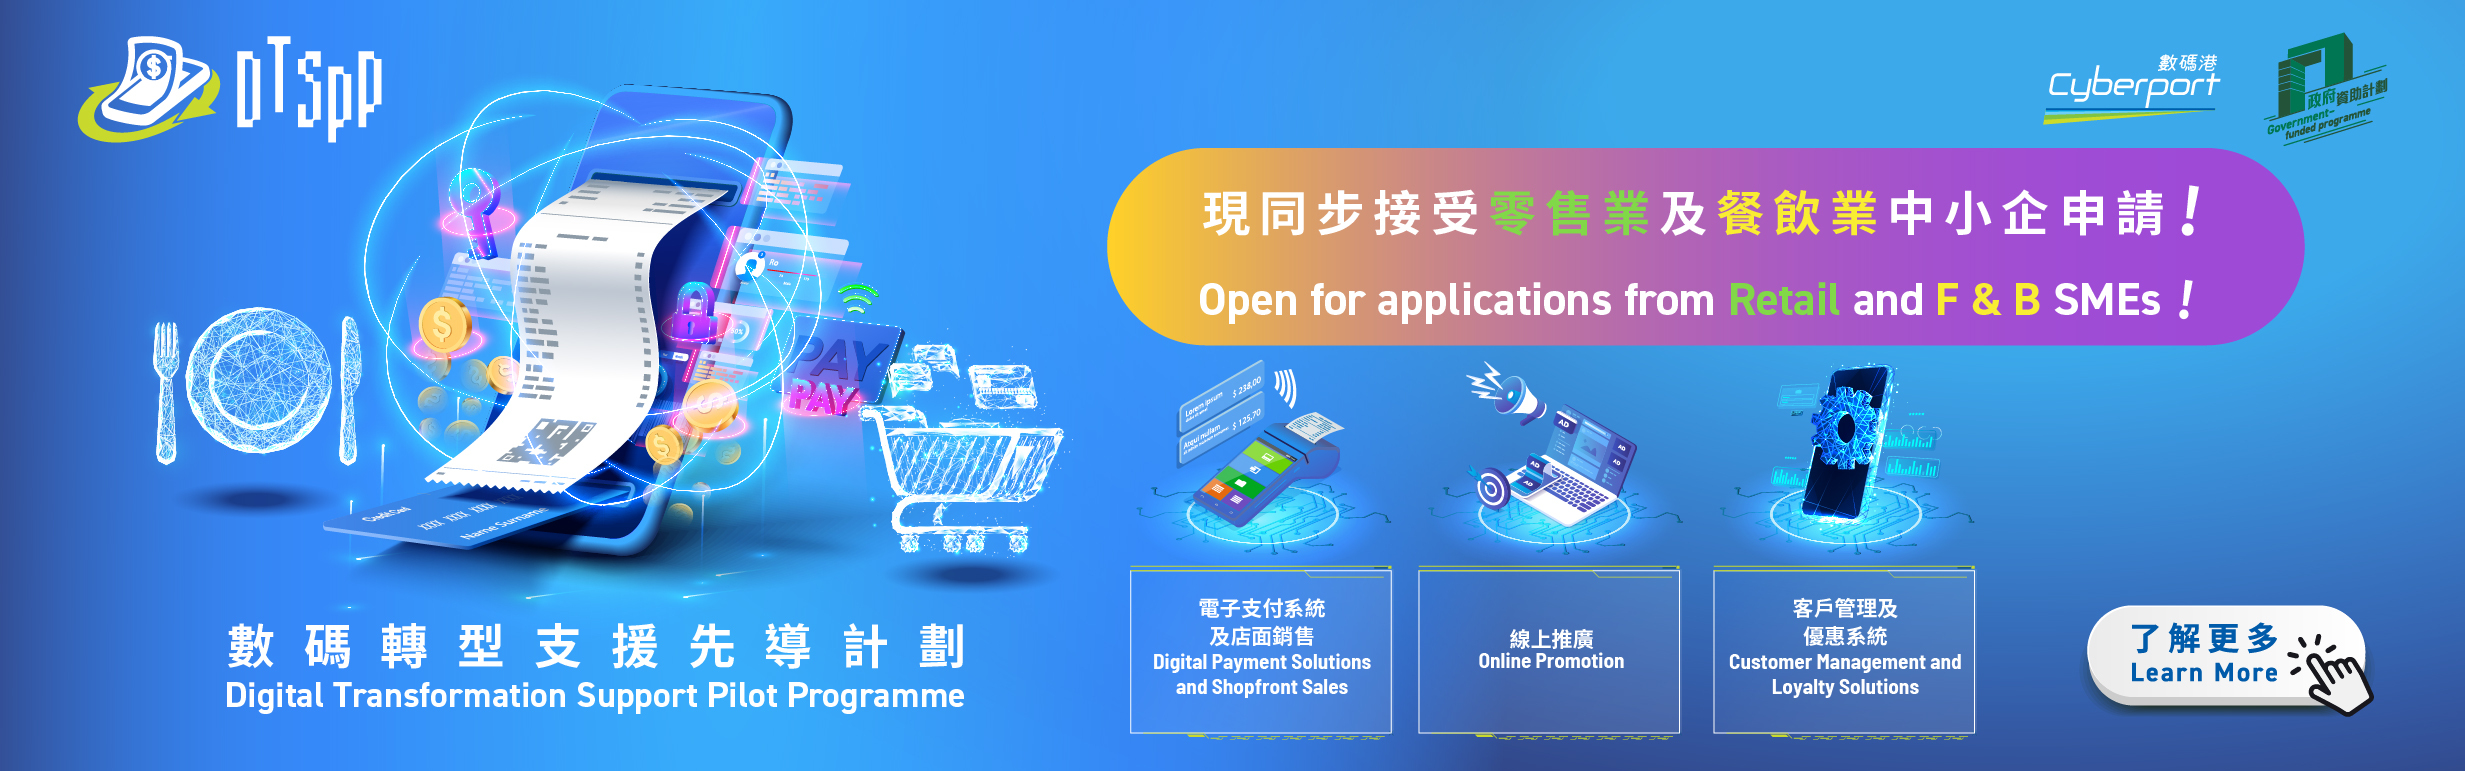 DTSPP opens for applications from Retail and F&B SMEs